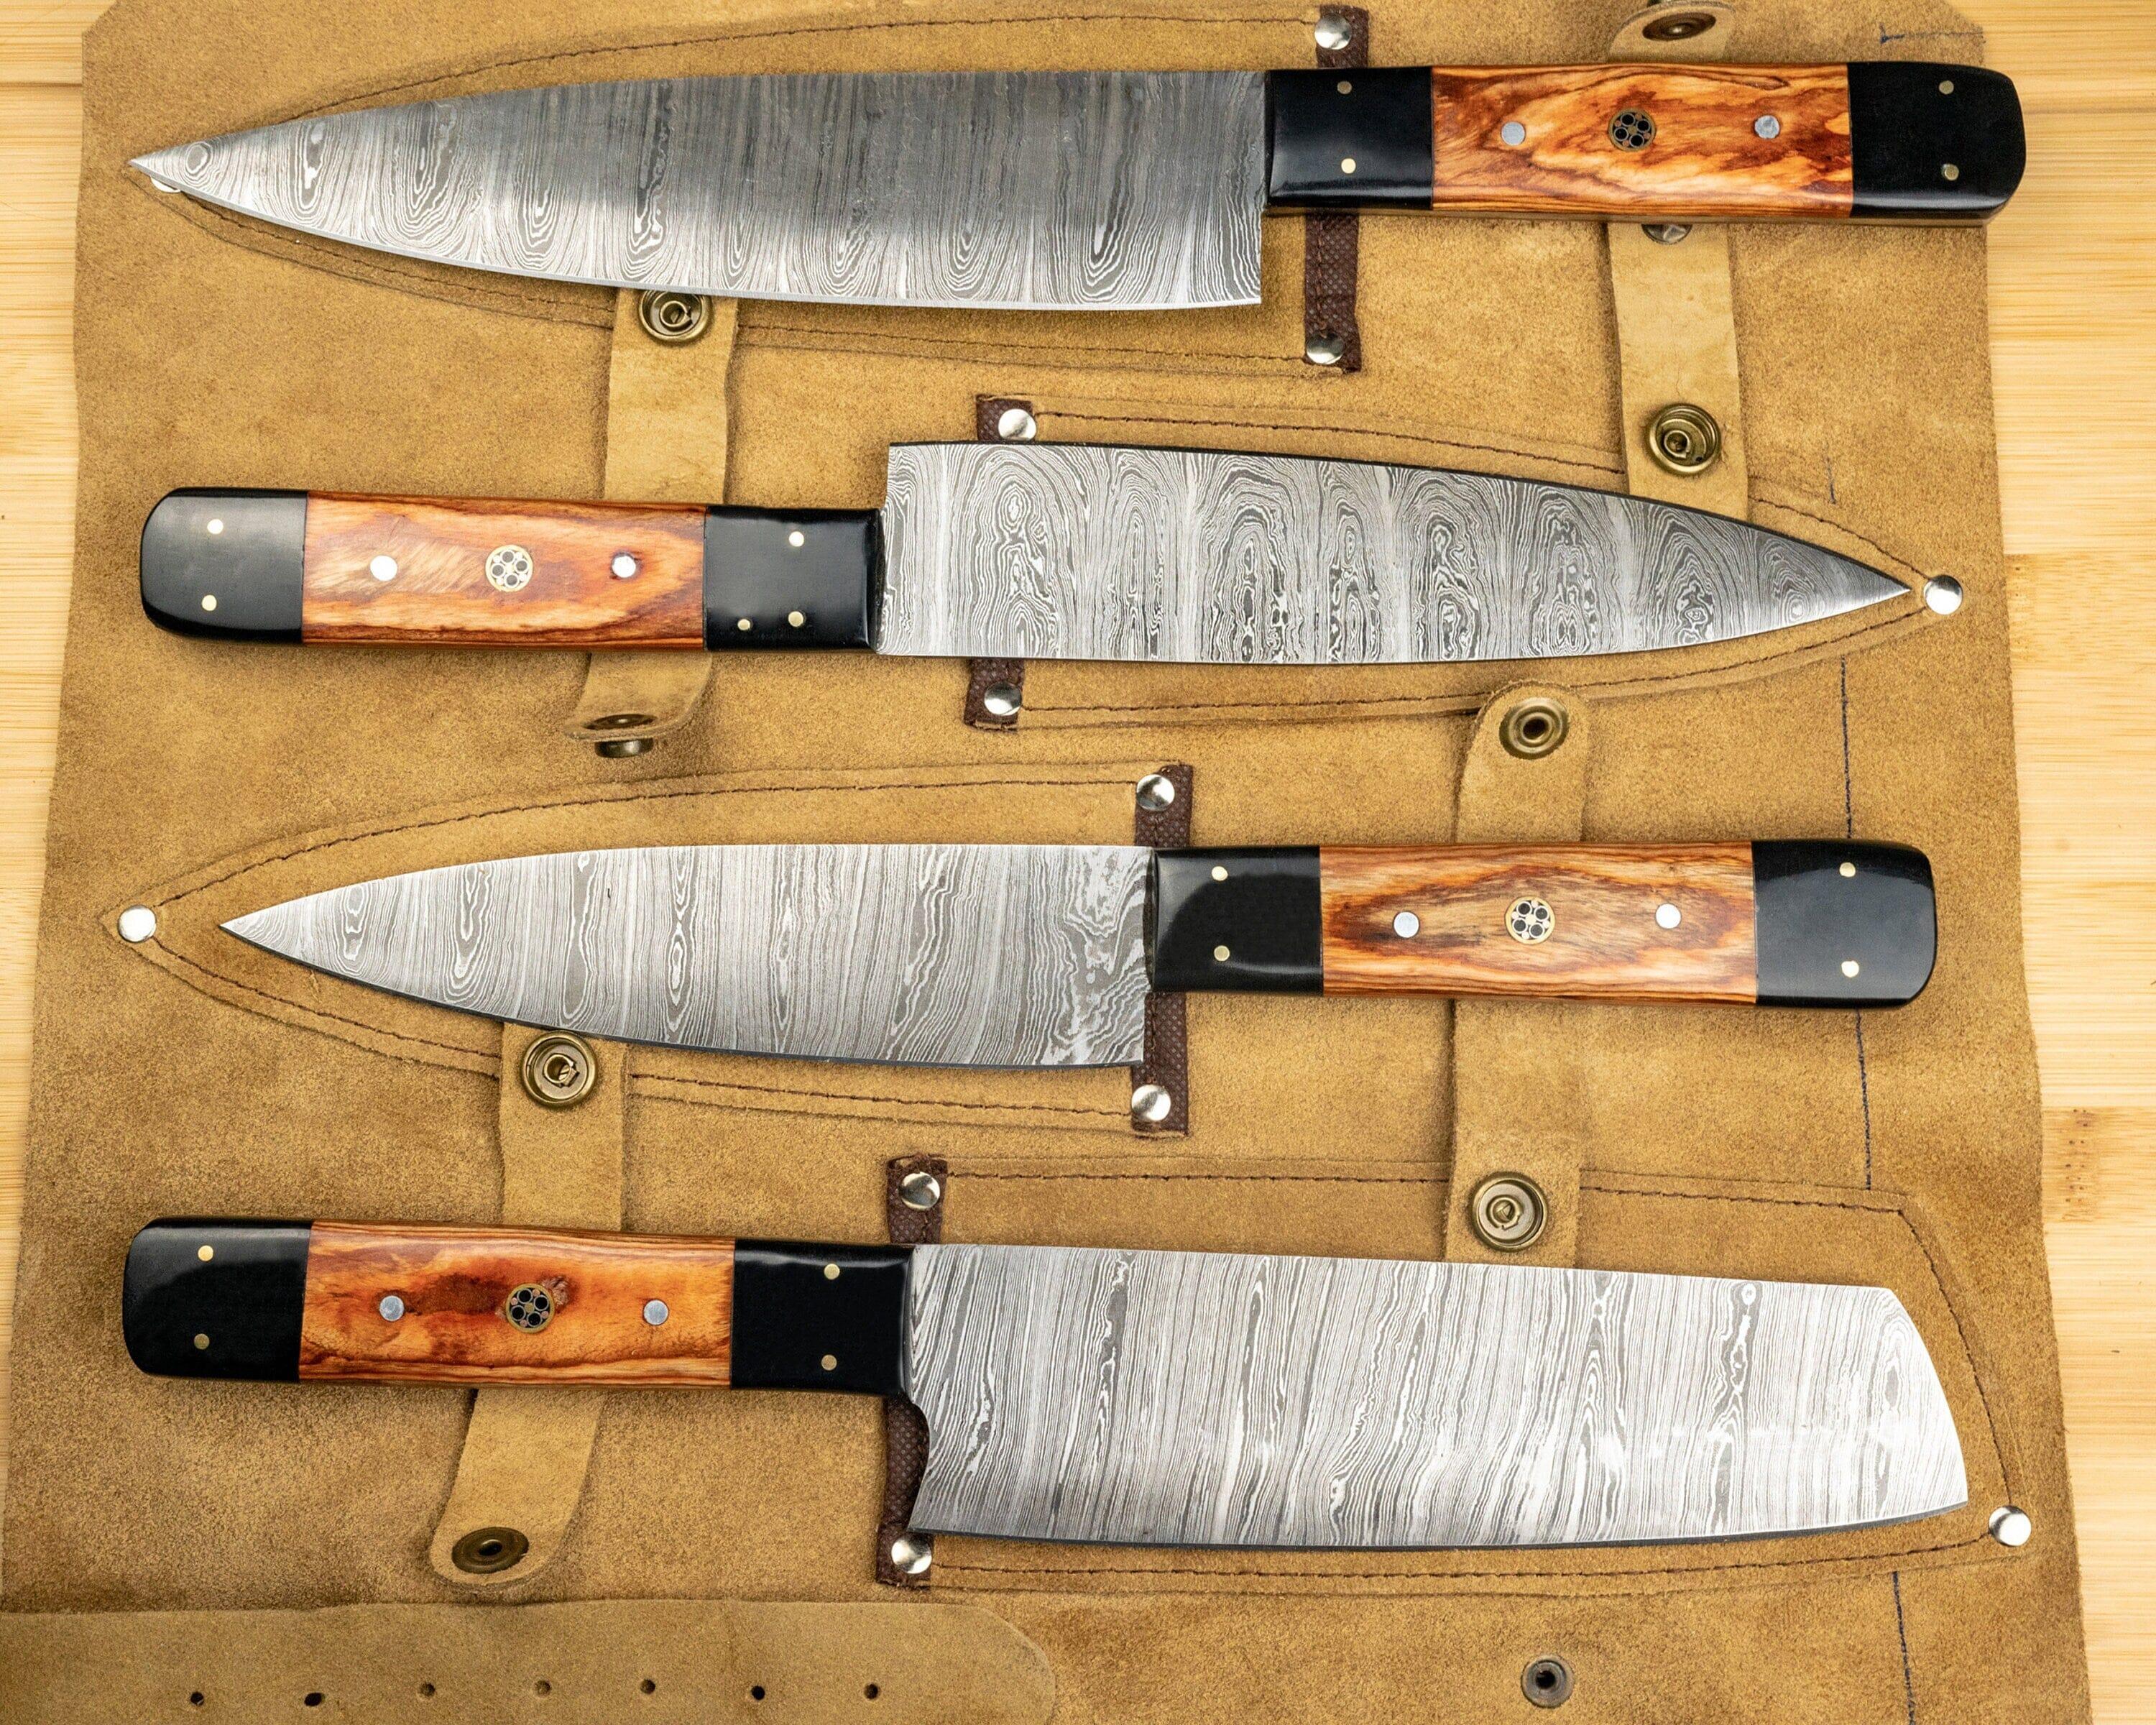 5 pcs Damascus Kitchen Cooking Knives – MORF STEEL